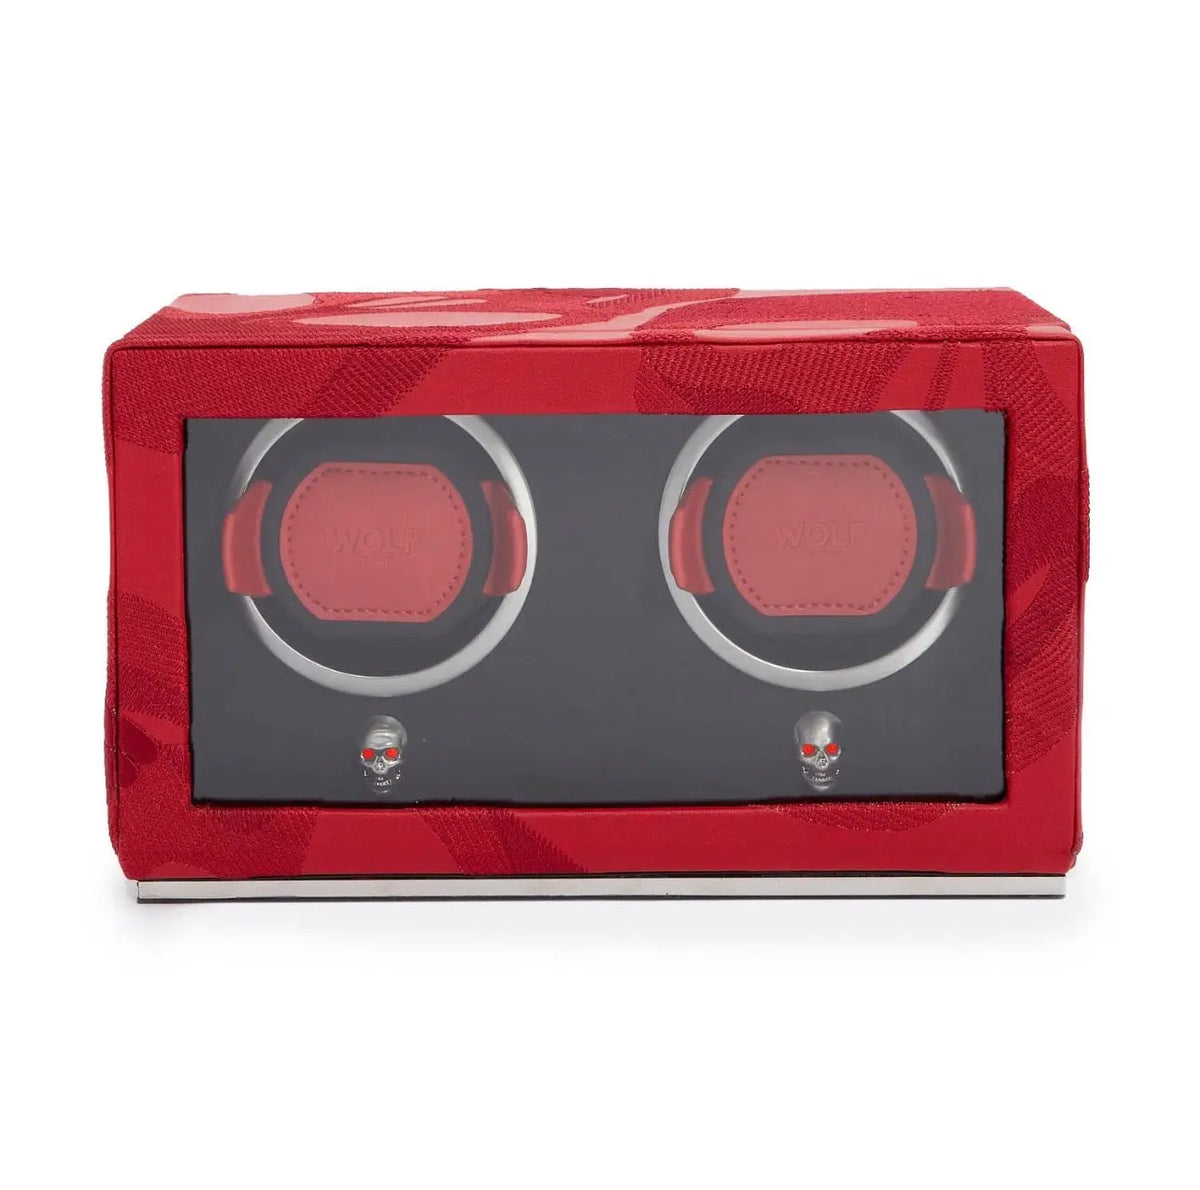 Memento Mori Double Cub Watch Winder Red - Squash Blossom Vail